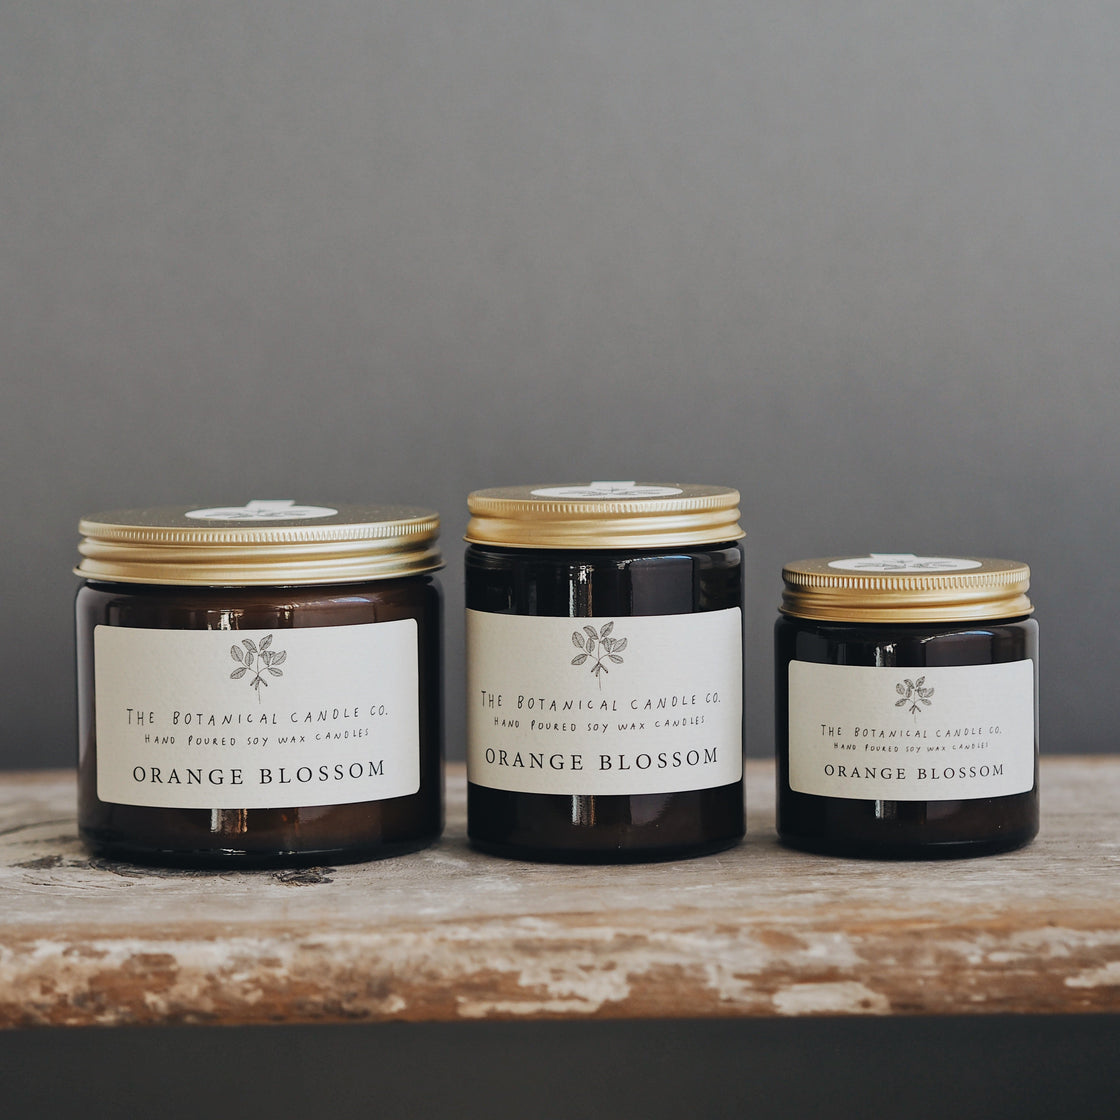 Orange Blossom Scented Soy Candles in Amber Jars – The Botanical Candle Co.